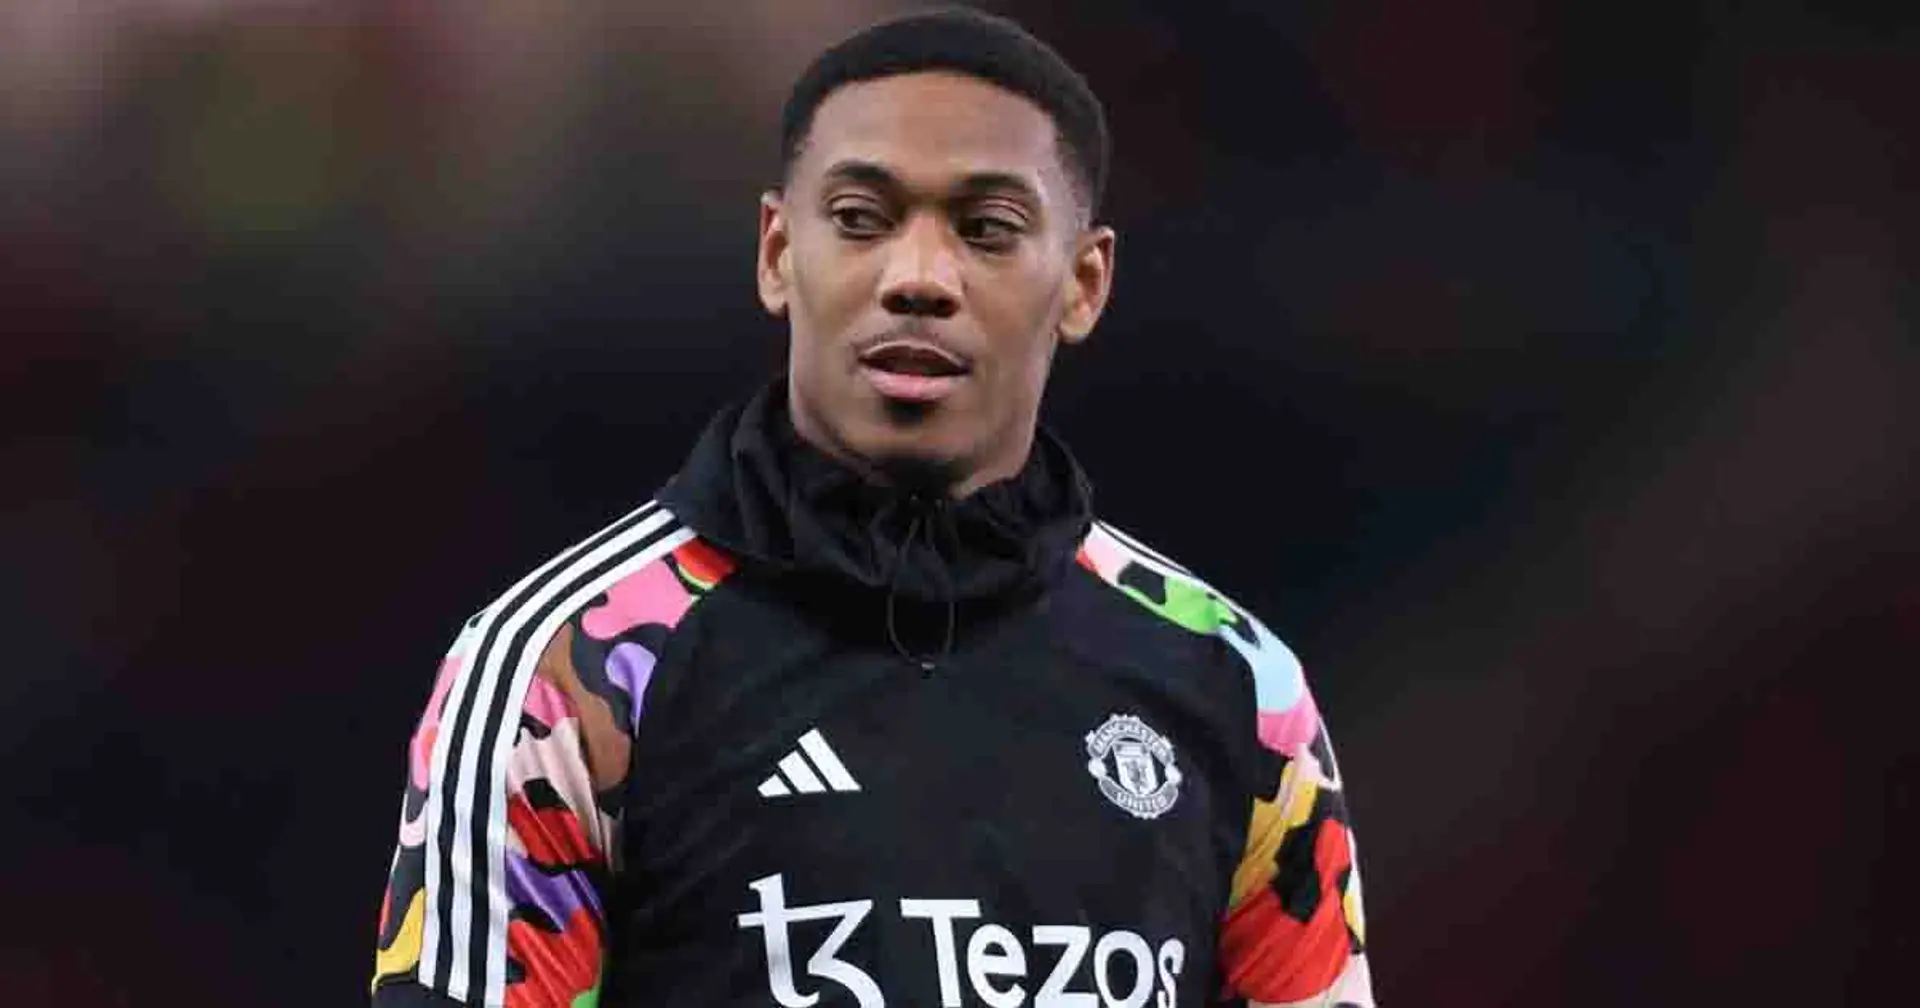 Anthony Martial rejected by one Ligue 1 side after offering to join as free agent